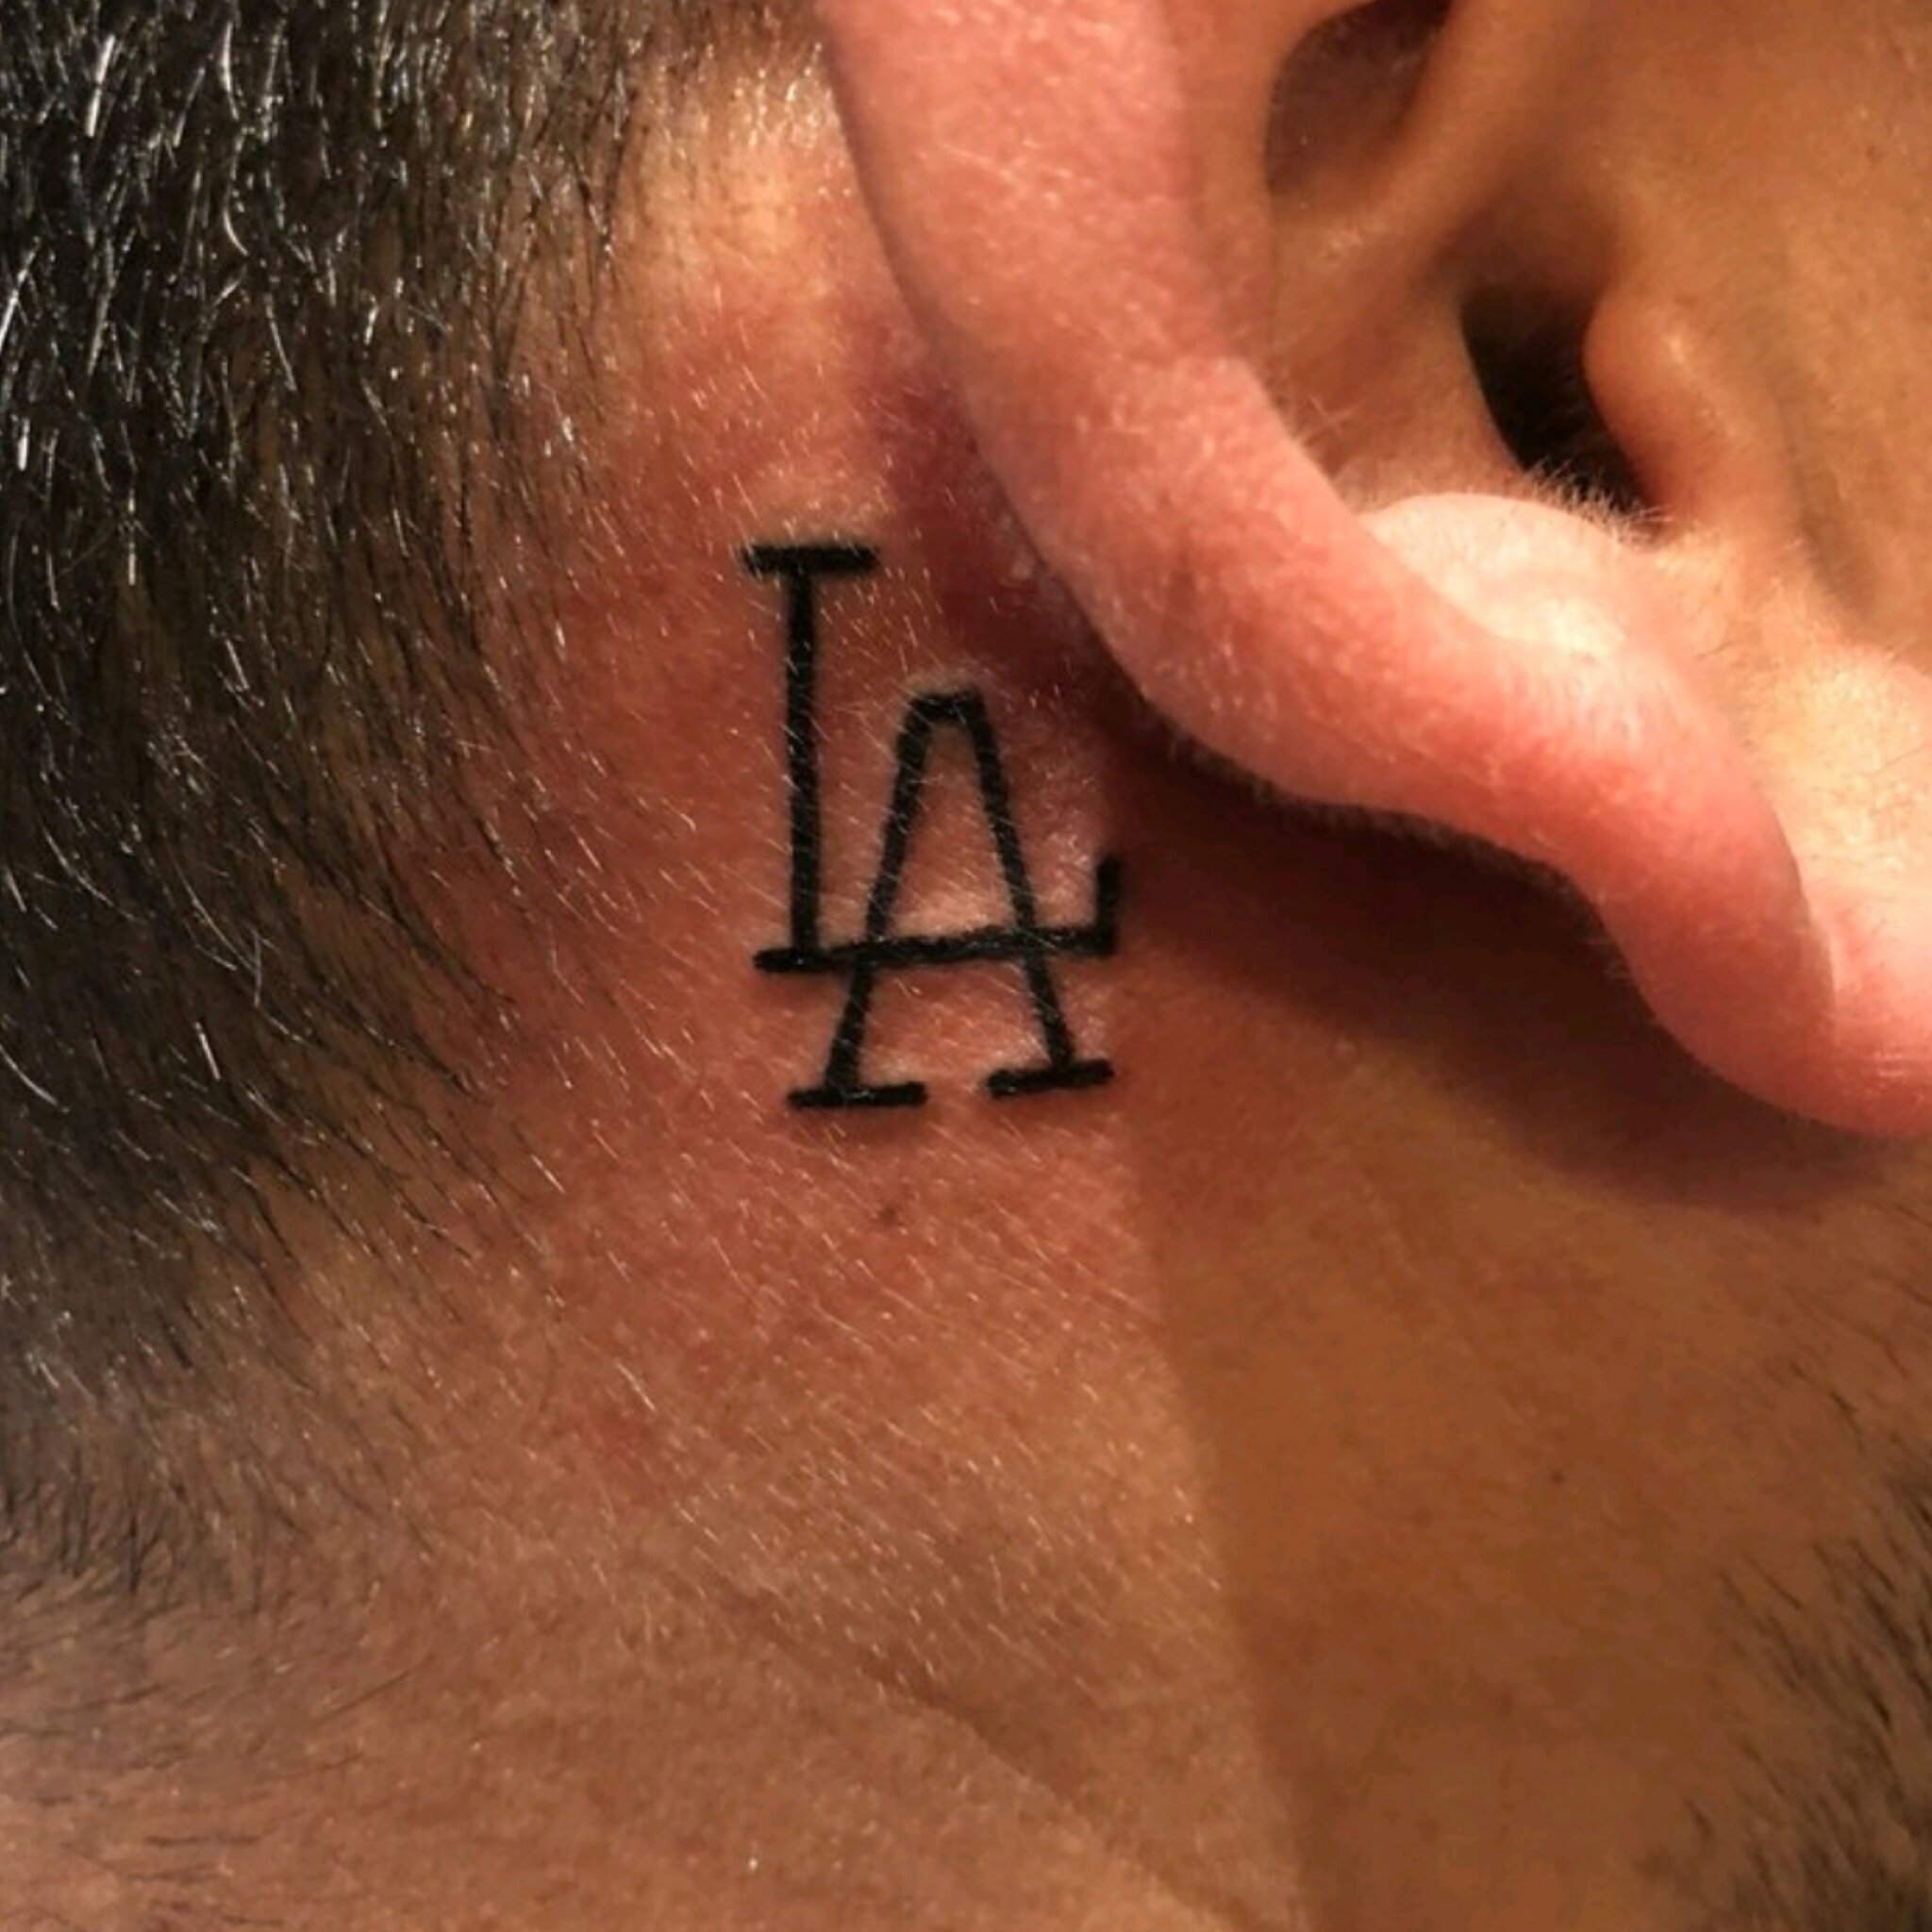 Los Angeles Tattoo Artists To Know